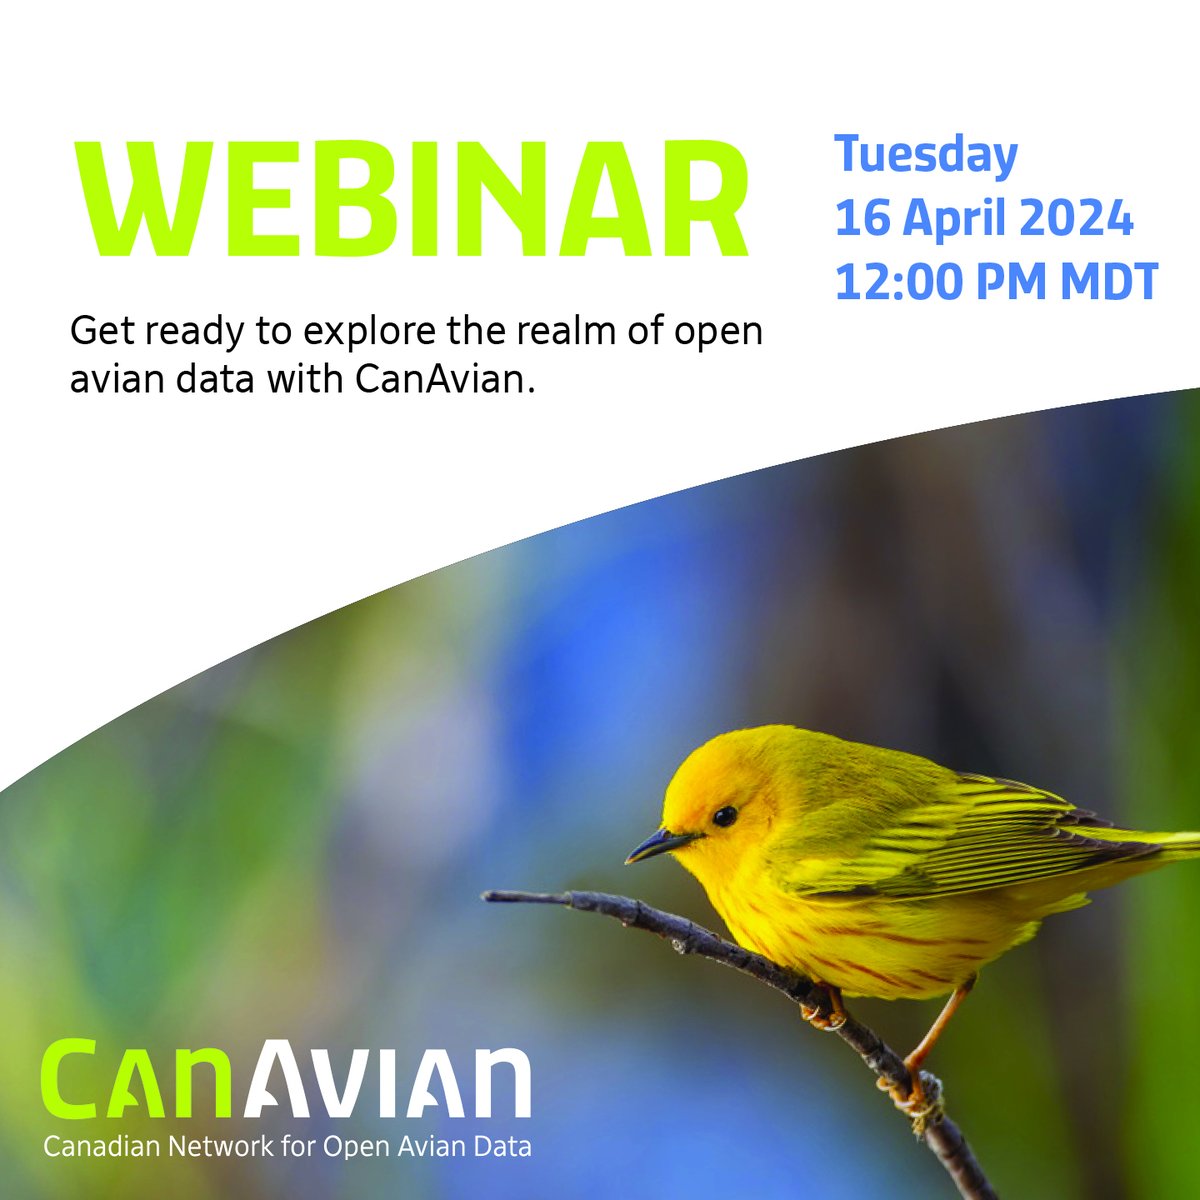 This presentation is a must-attend for anyone passionate about avian conservation and the power of shared knowledge: ow.ly/xUeR50QO3BM

#opendata #aviandata #collaborative #webinar